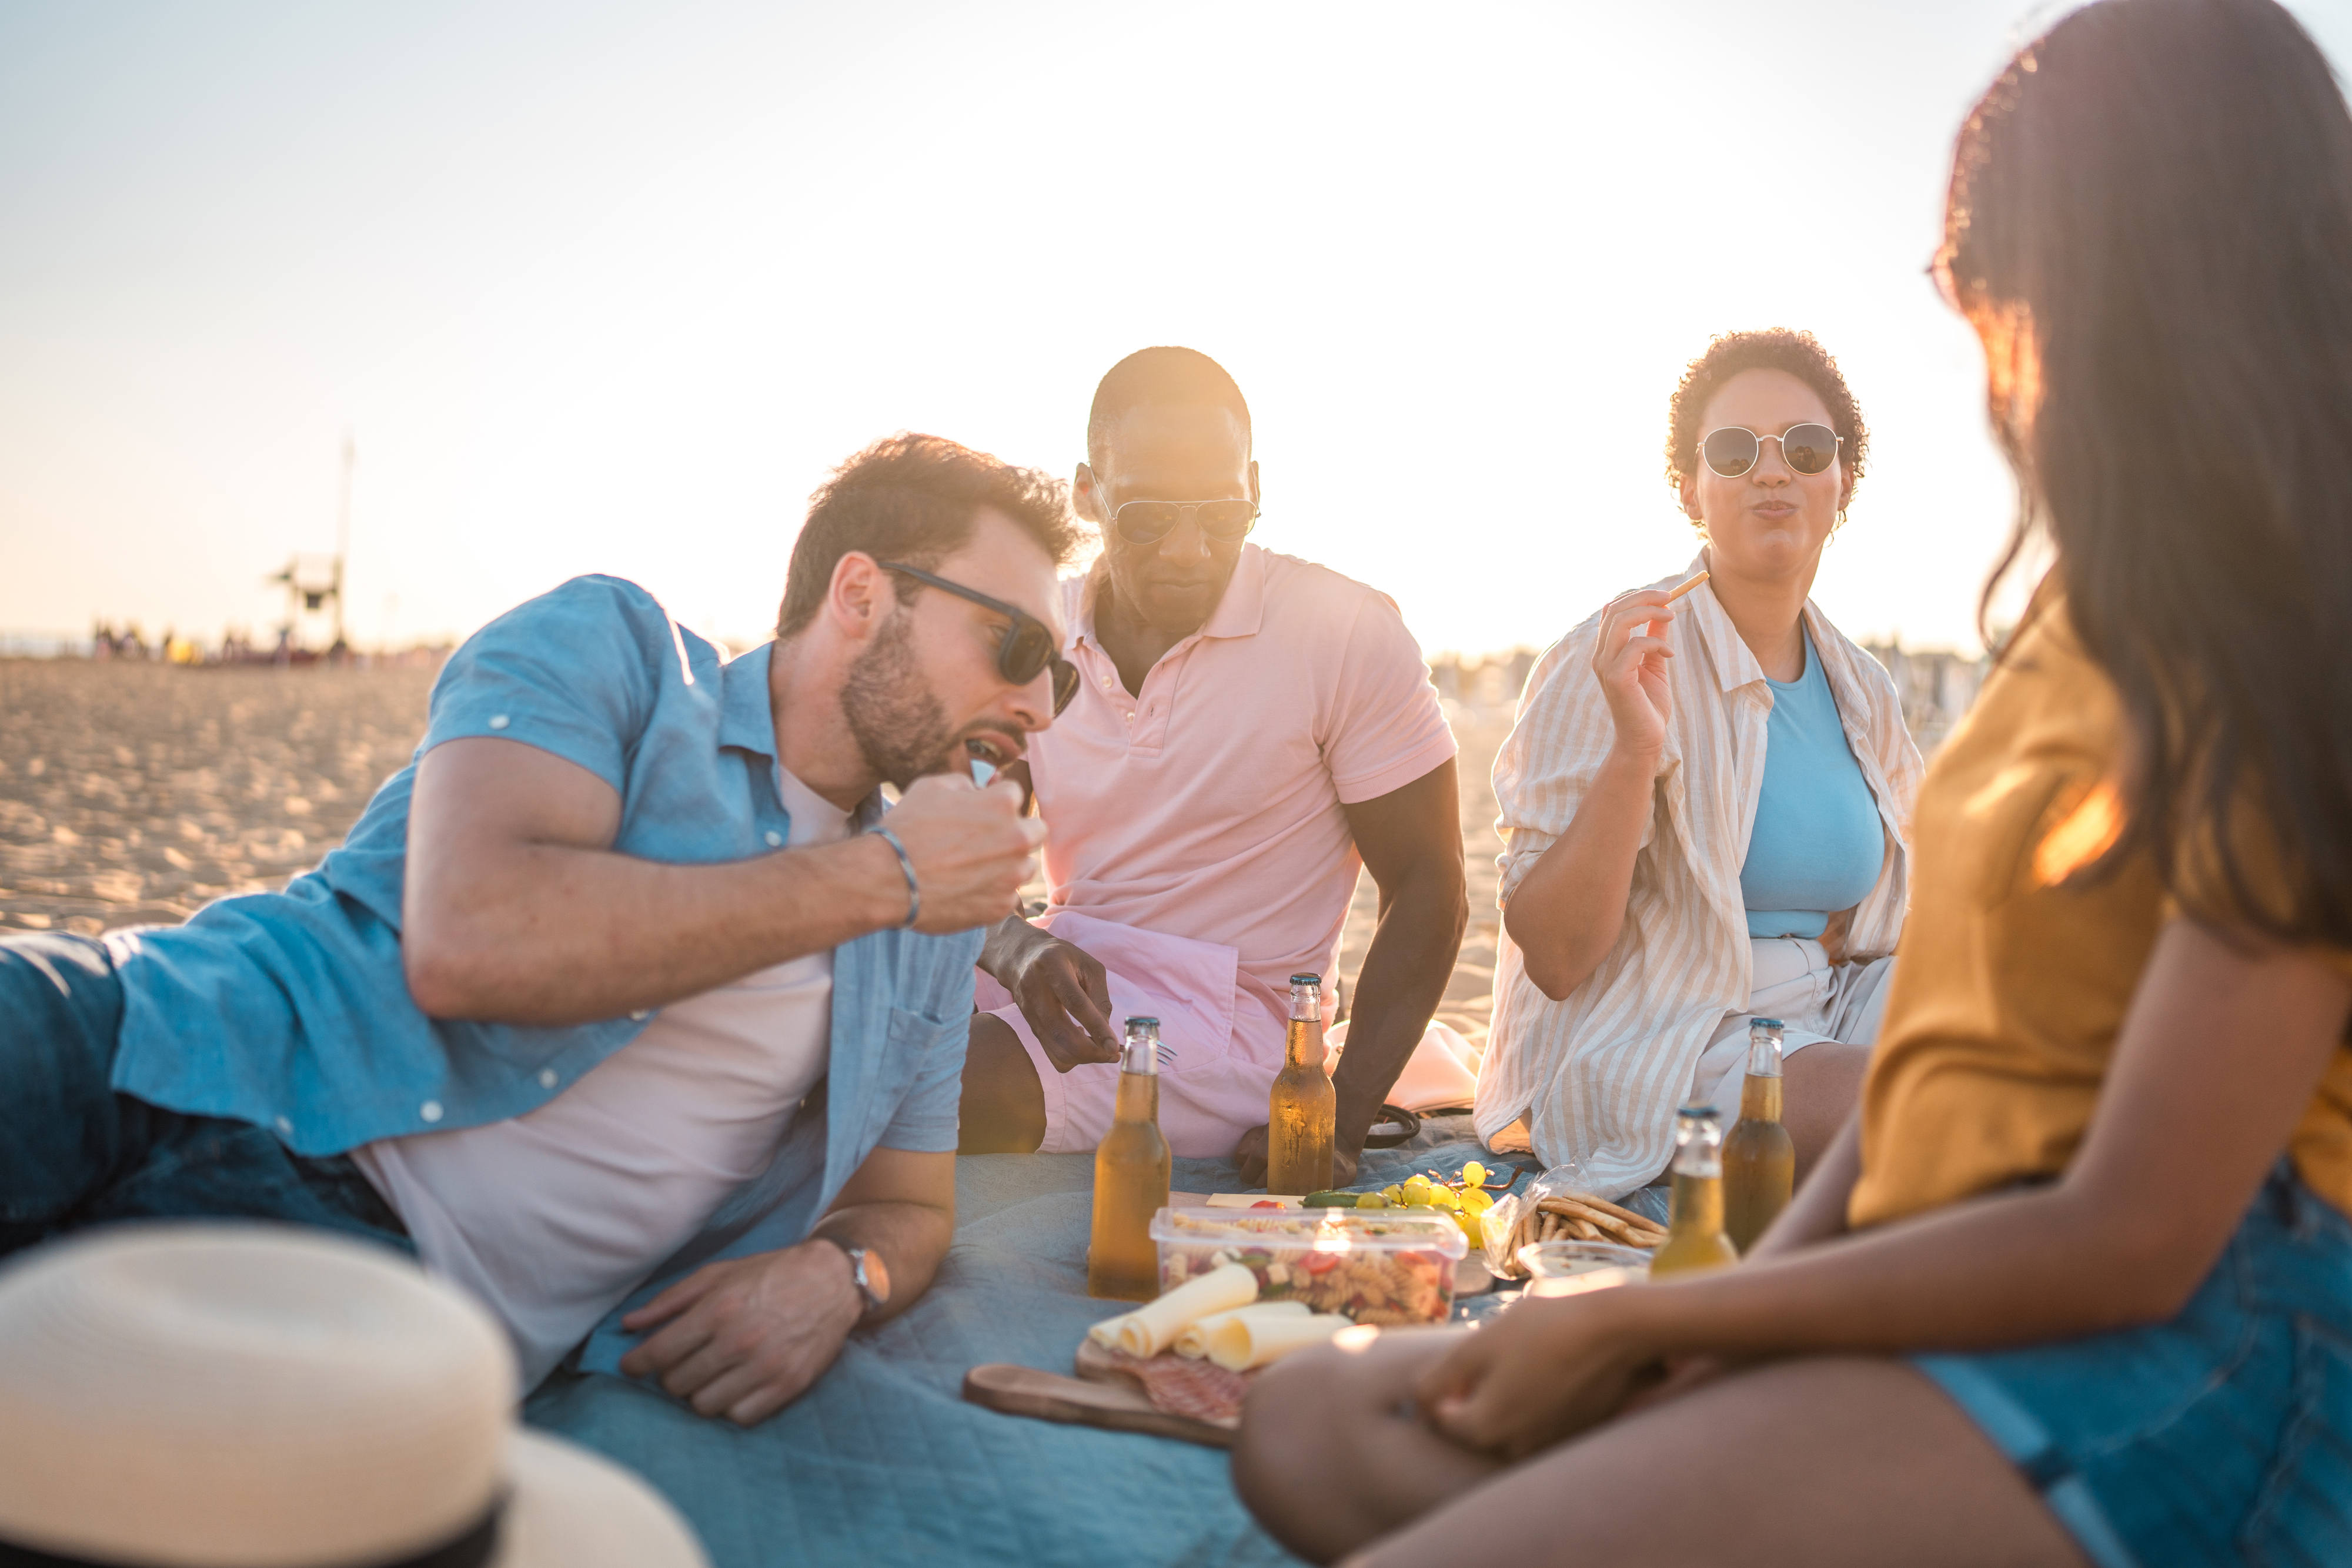 A group of four friends enjoying a picnic on the beach, sharing snacks and drinks, with a warm sunlit backdrop. Names unknown